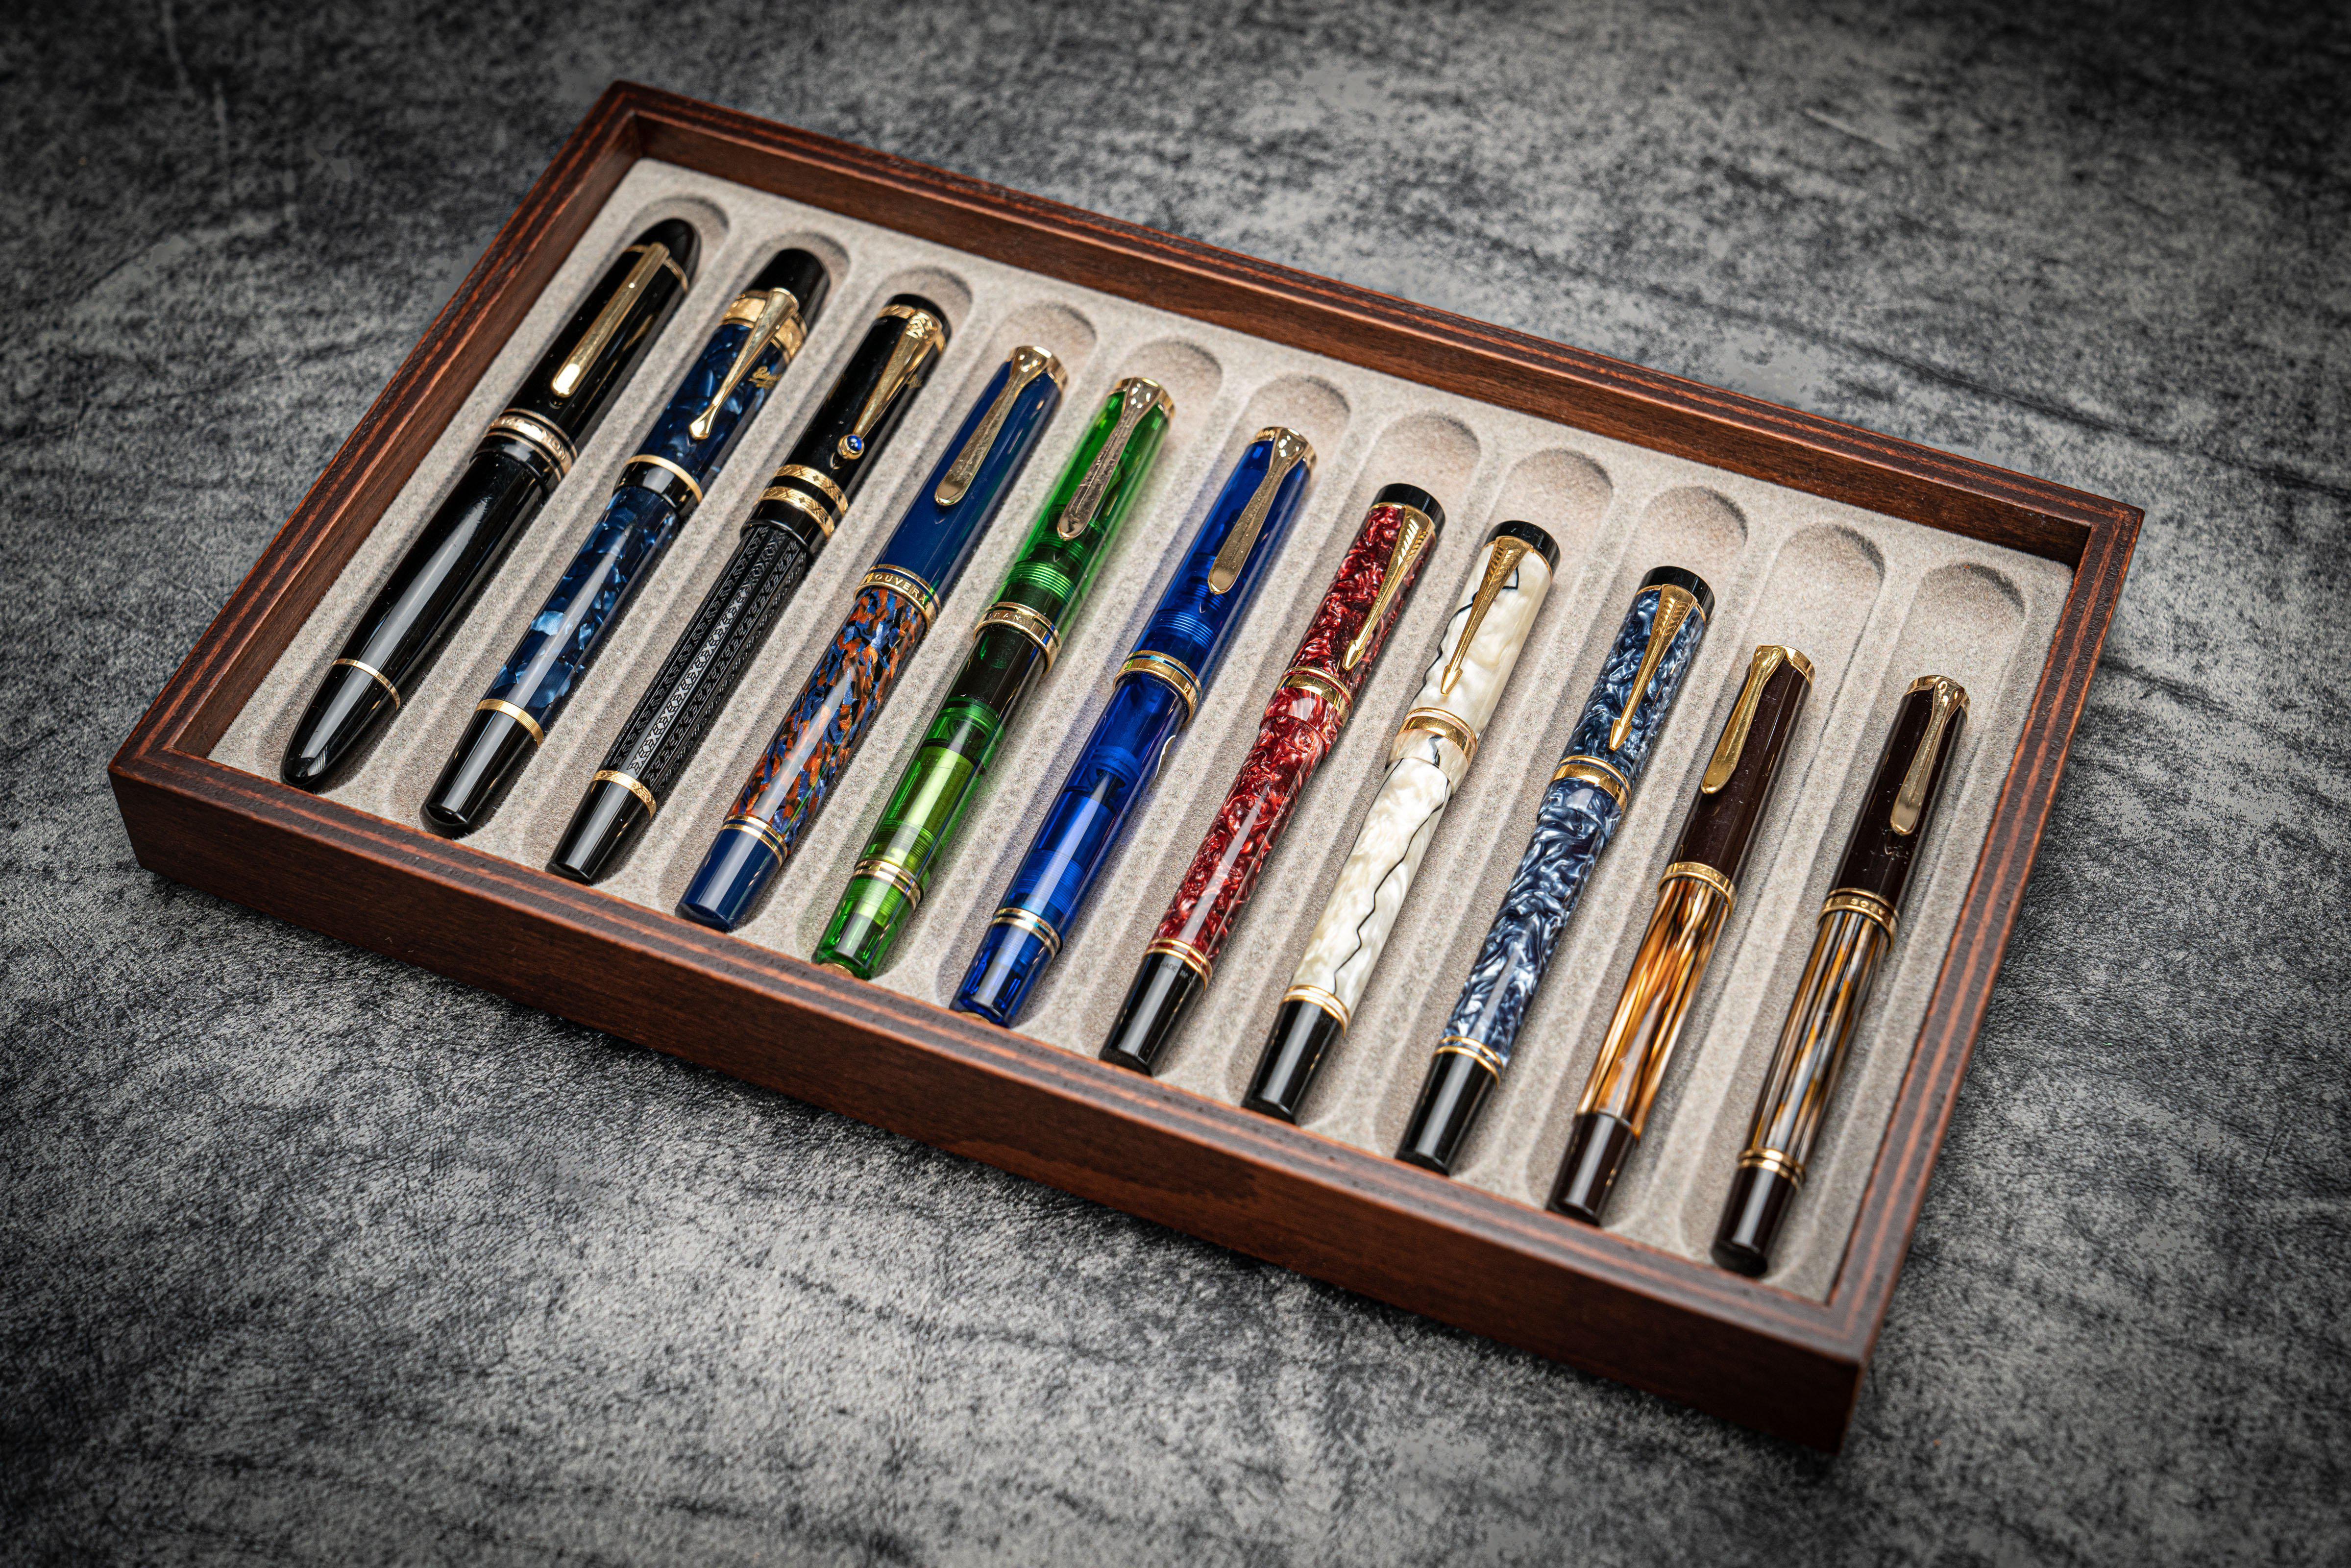 Stack & Store Wood Pen Display Box - Without Top